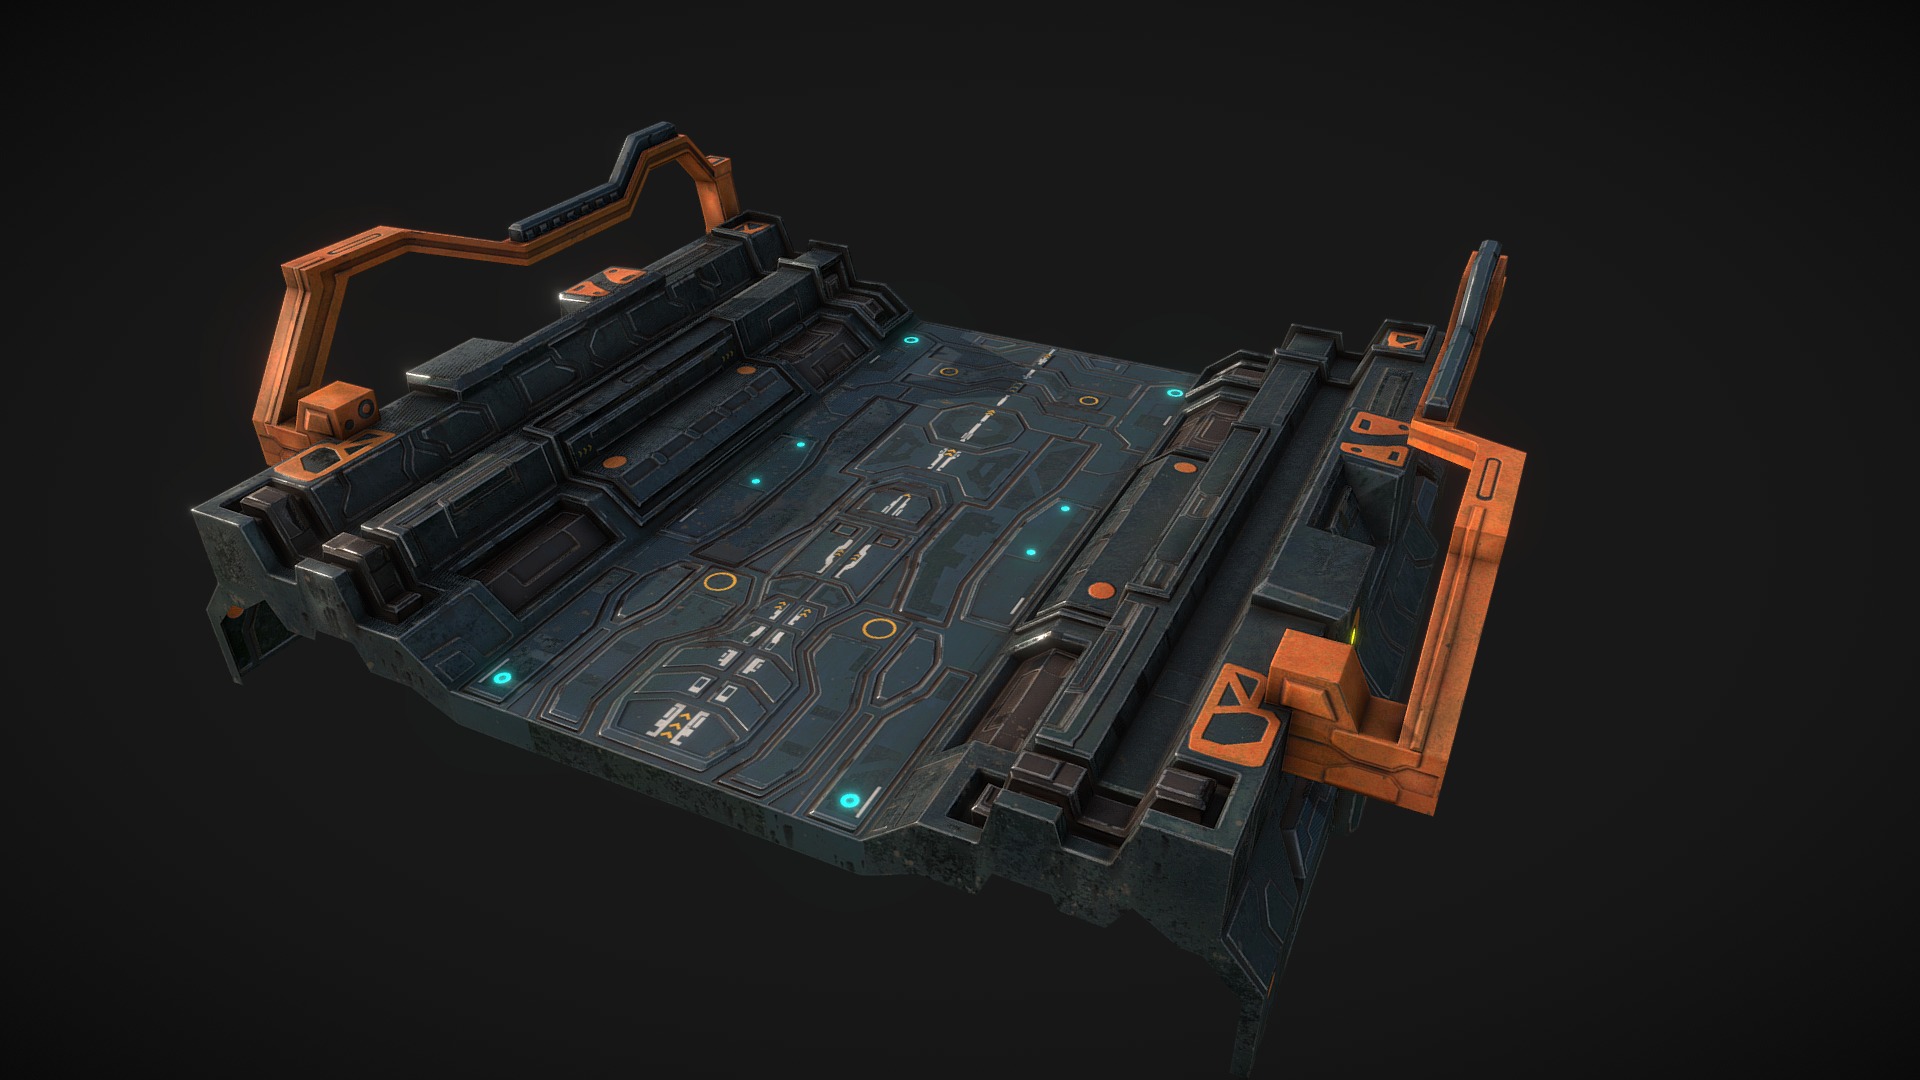 3D model Low poly sci fi road patch environment asset - This is a 3D model of the Low poly sci fi road patch environment asset. The 3D model is about a close-up of a computer chip.